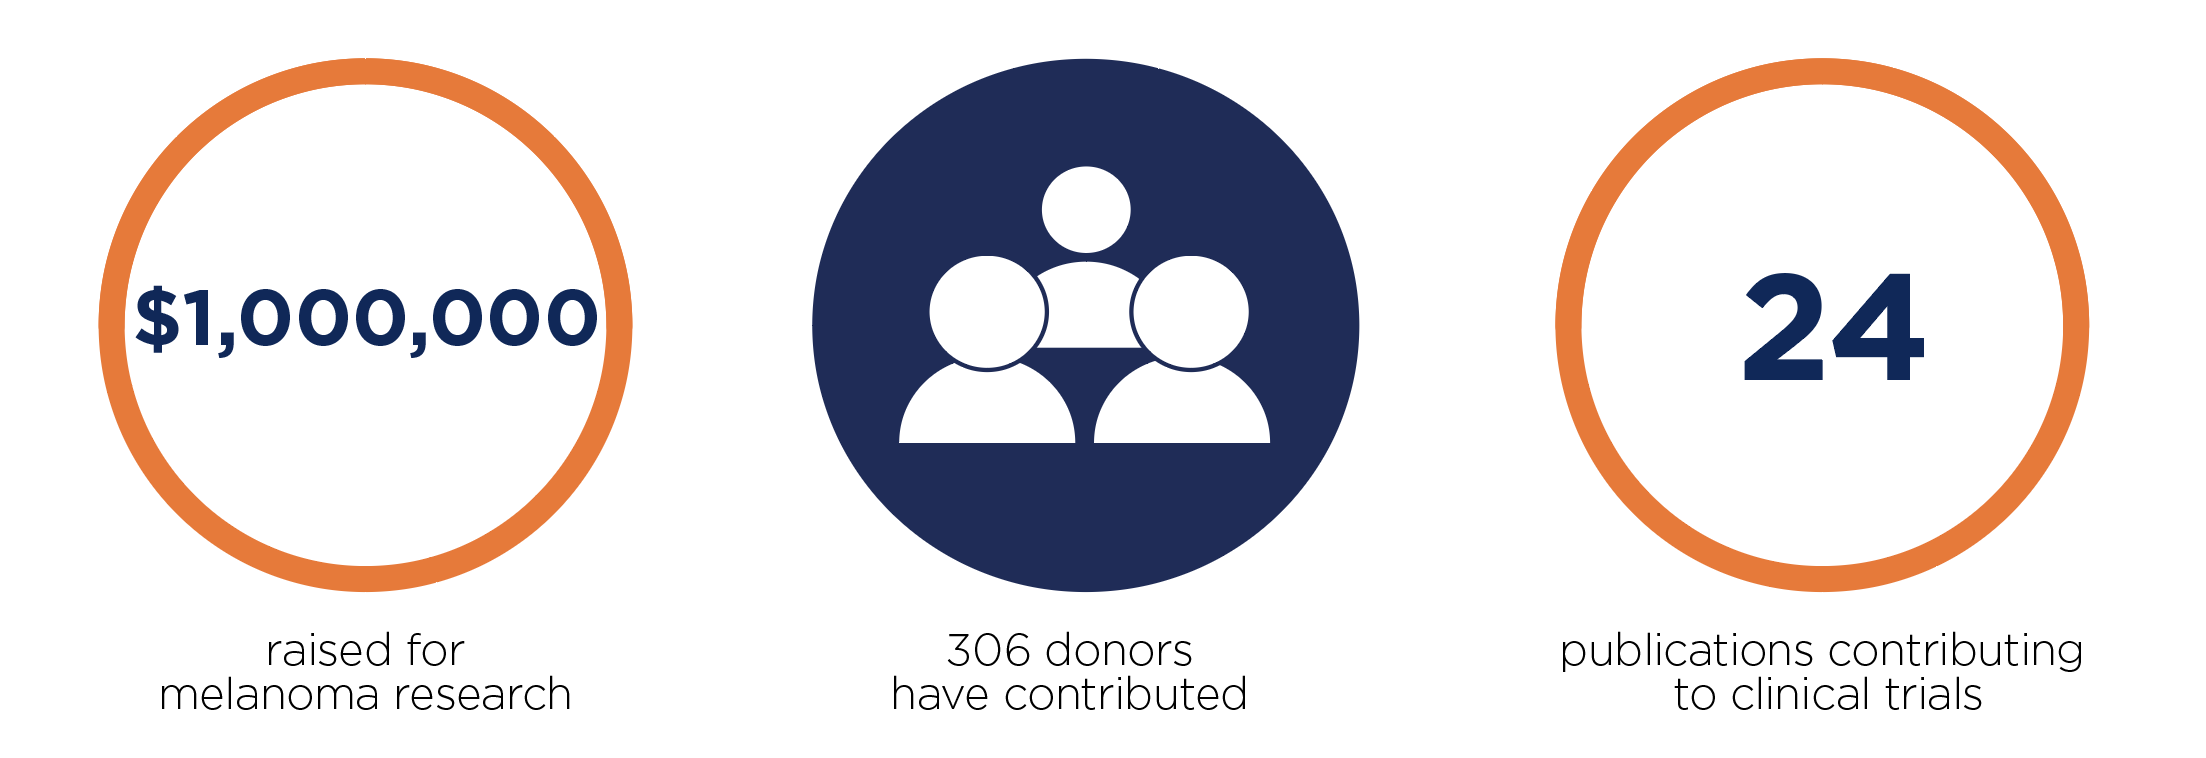 infographic: 1 million dollars raised, 306 donors, 24 publications contributing